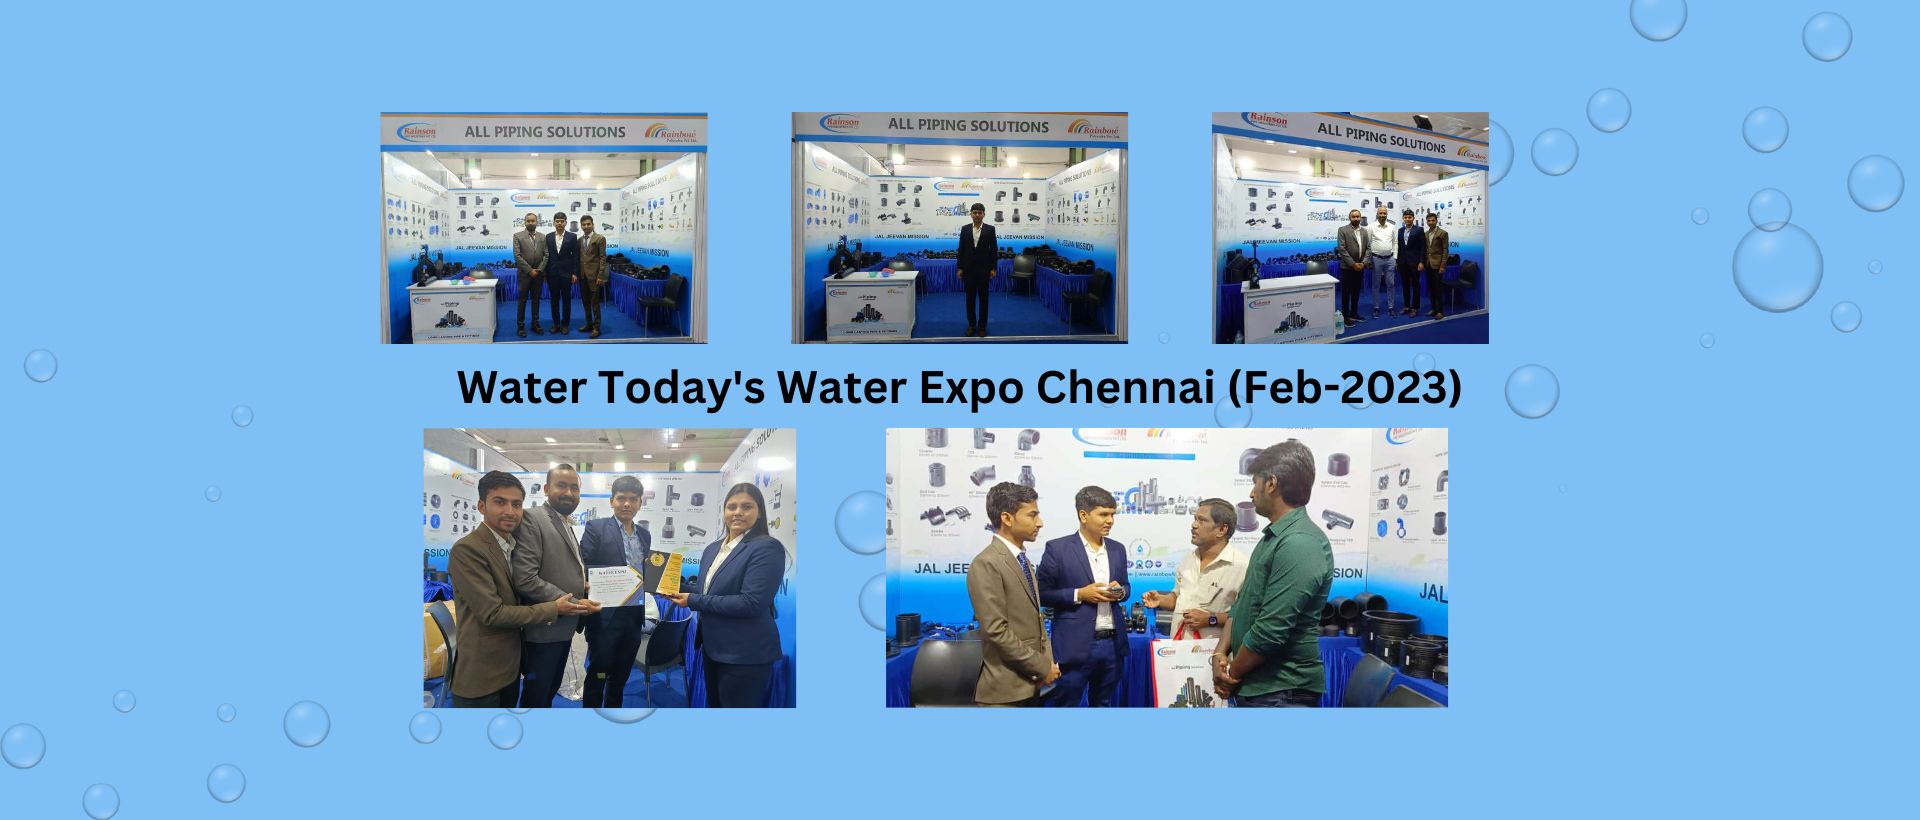 Water Today's Water Expo Chennai Feb-2023